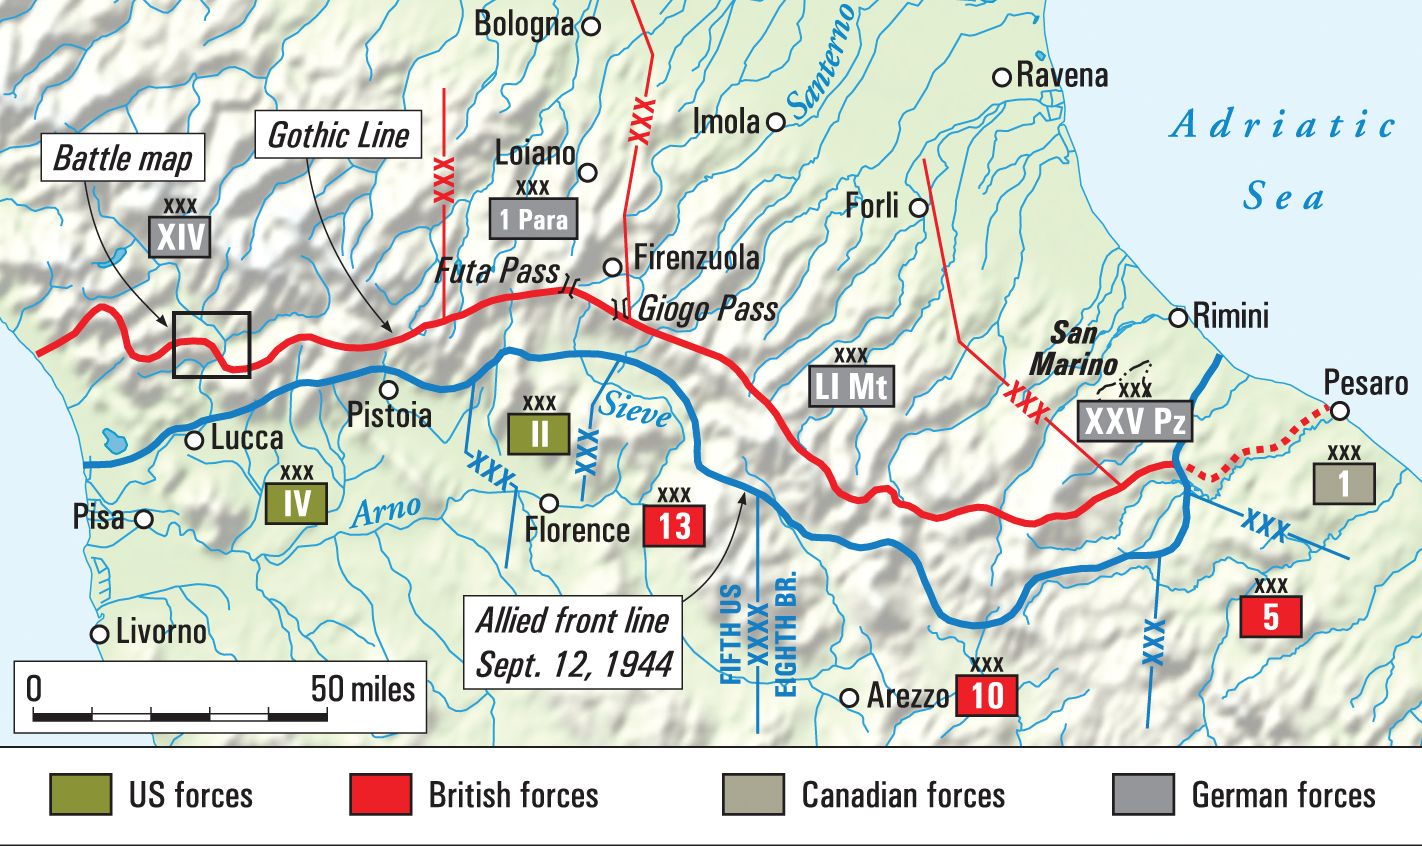 The Germans’ “Gothic Line” defenses stretched the width of Italy. The 92nd Division was positioned along the far western end.